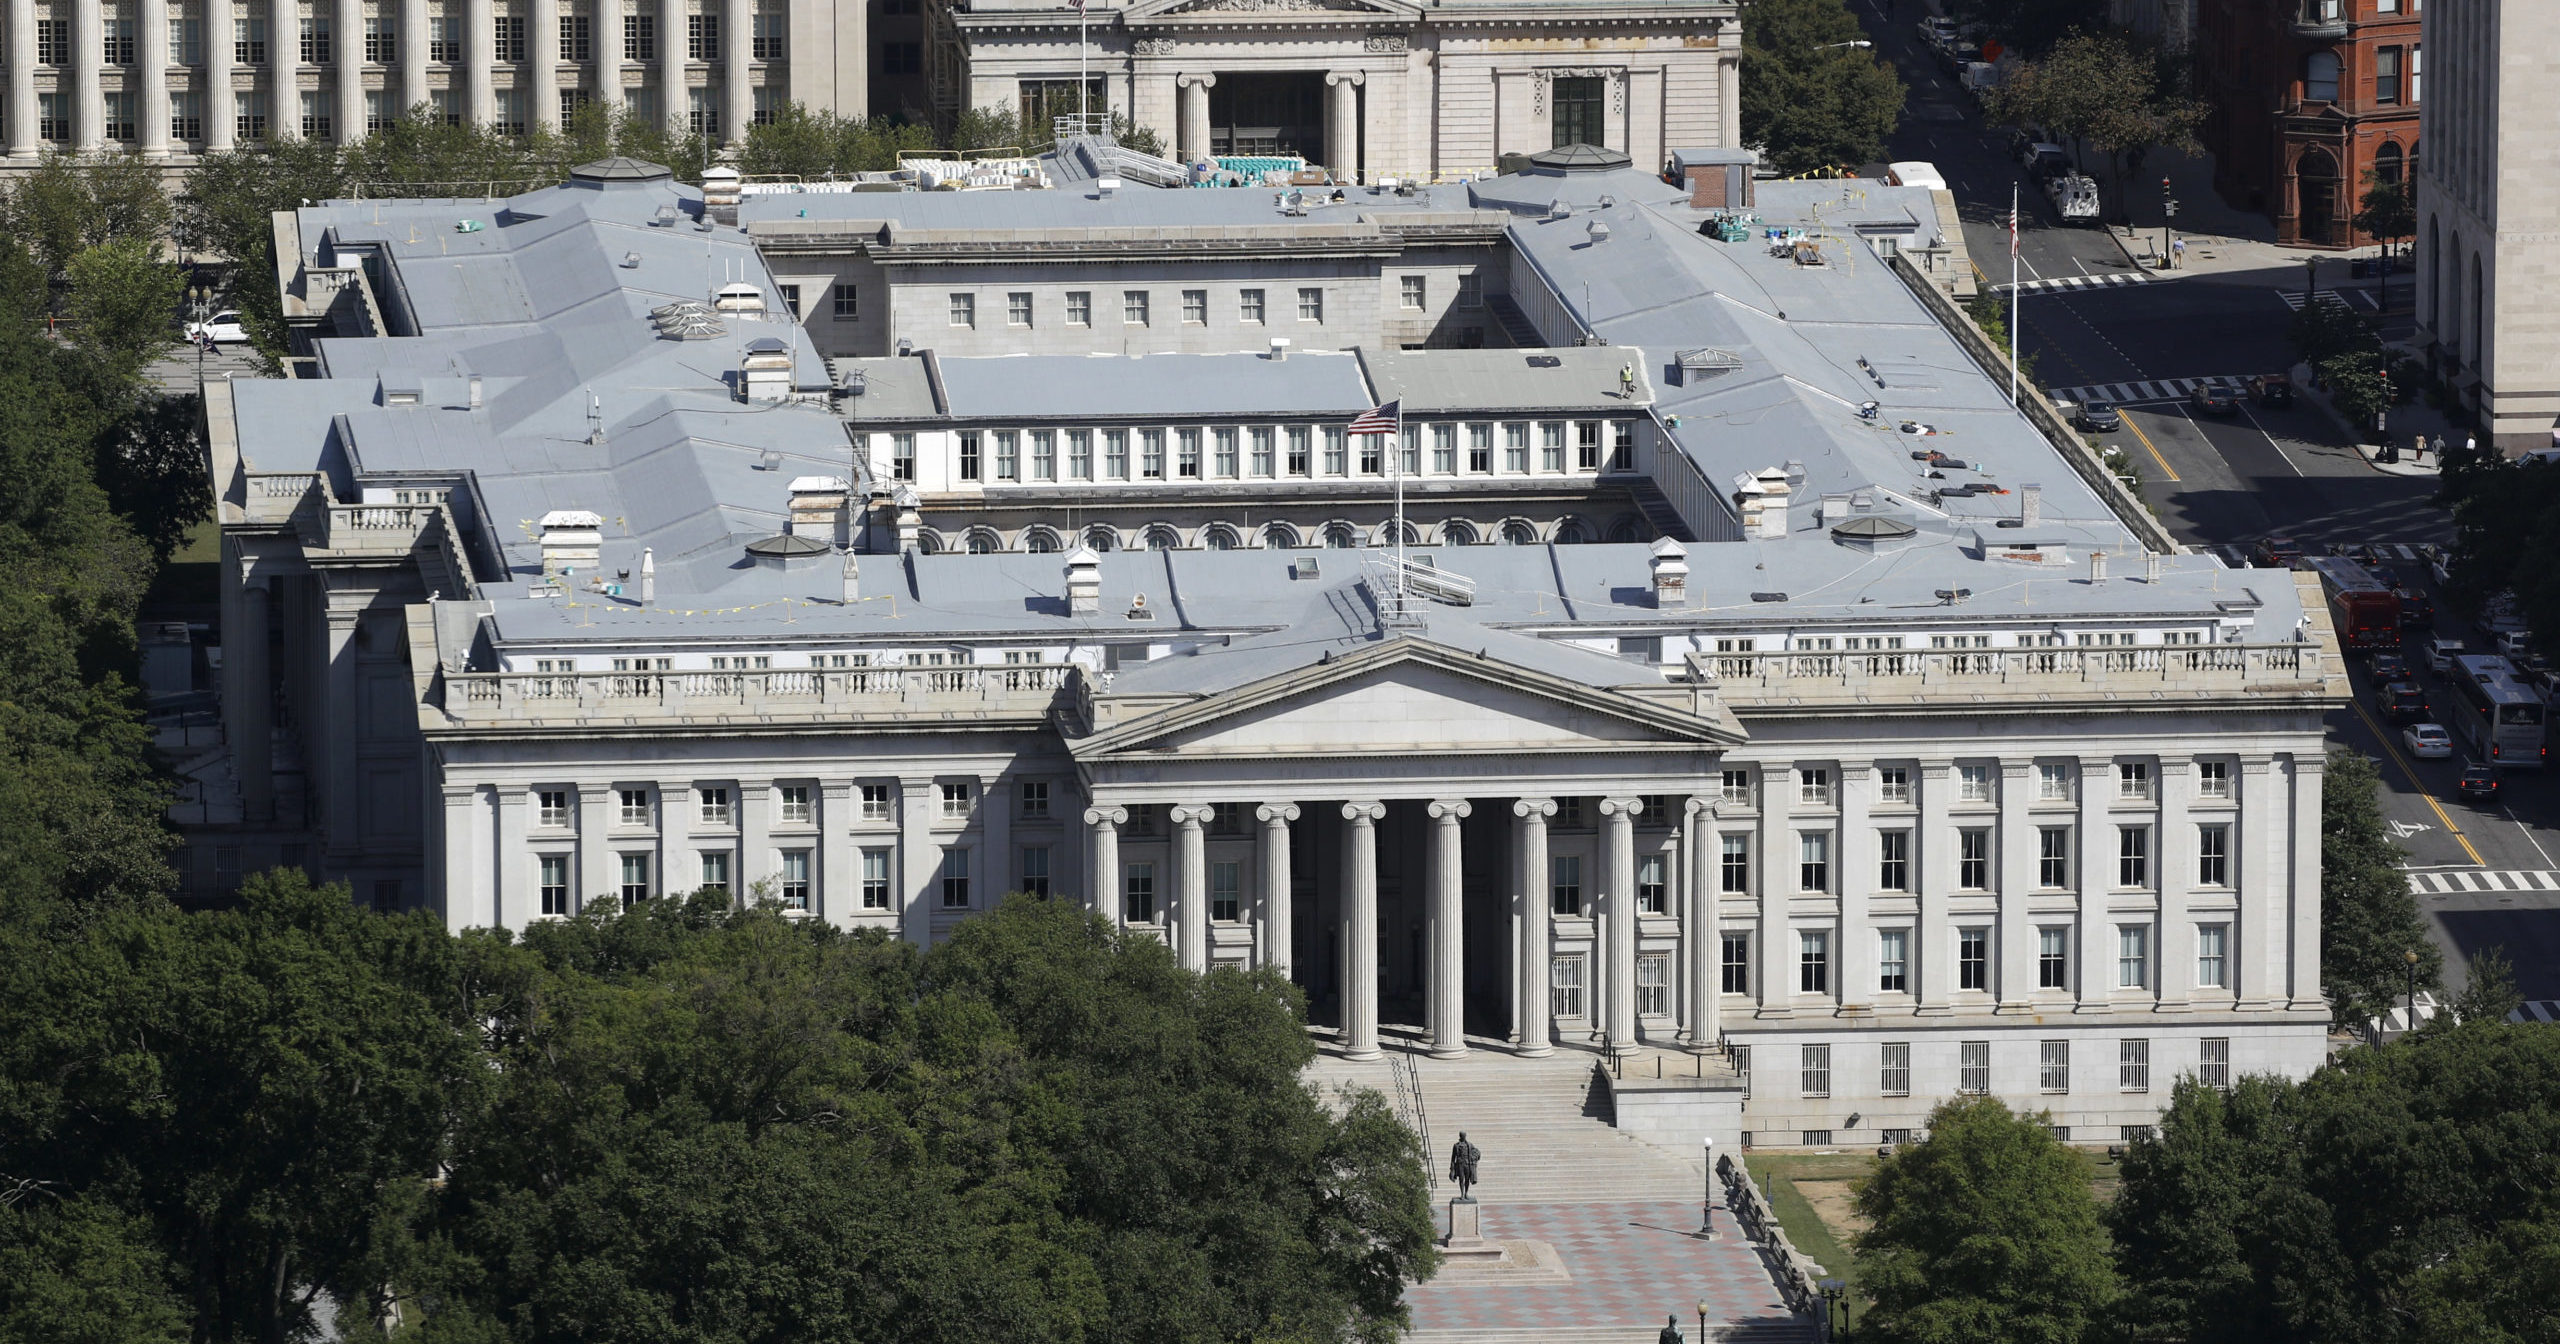 The US Treasury Department building is viewed from the Washington Monument on Sept. 18, 2019, in Washington, D.C.